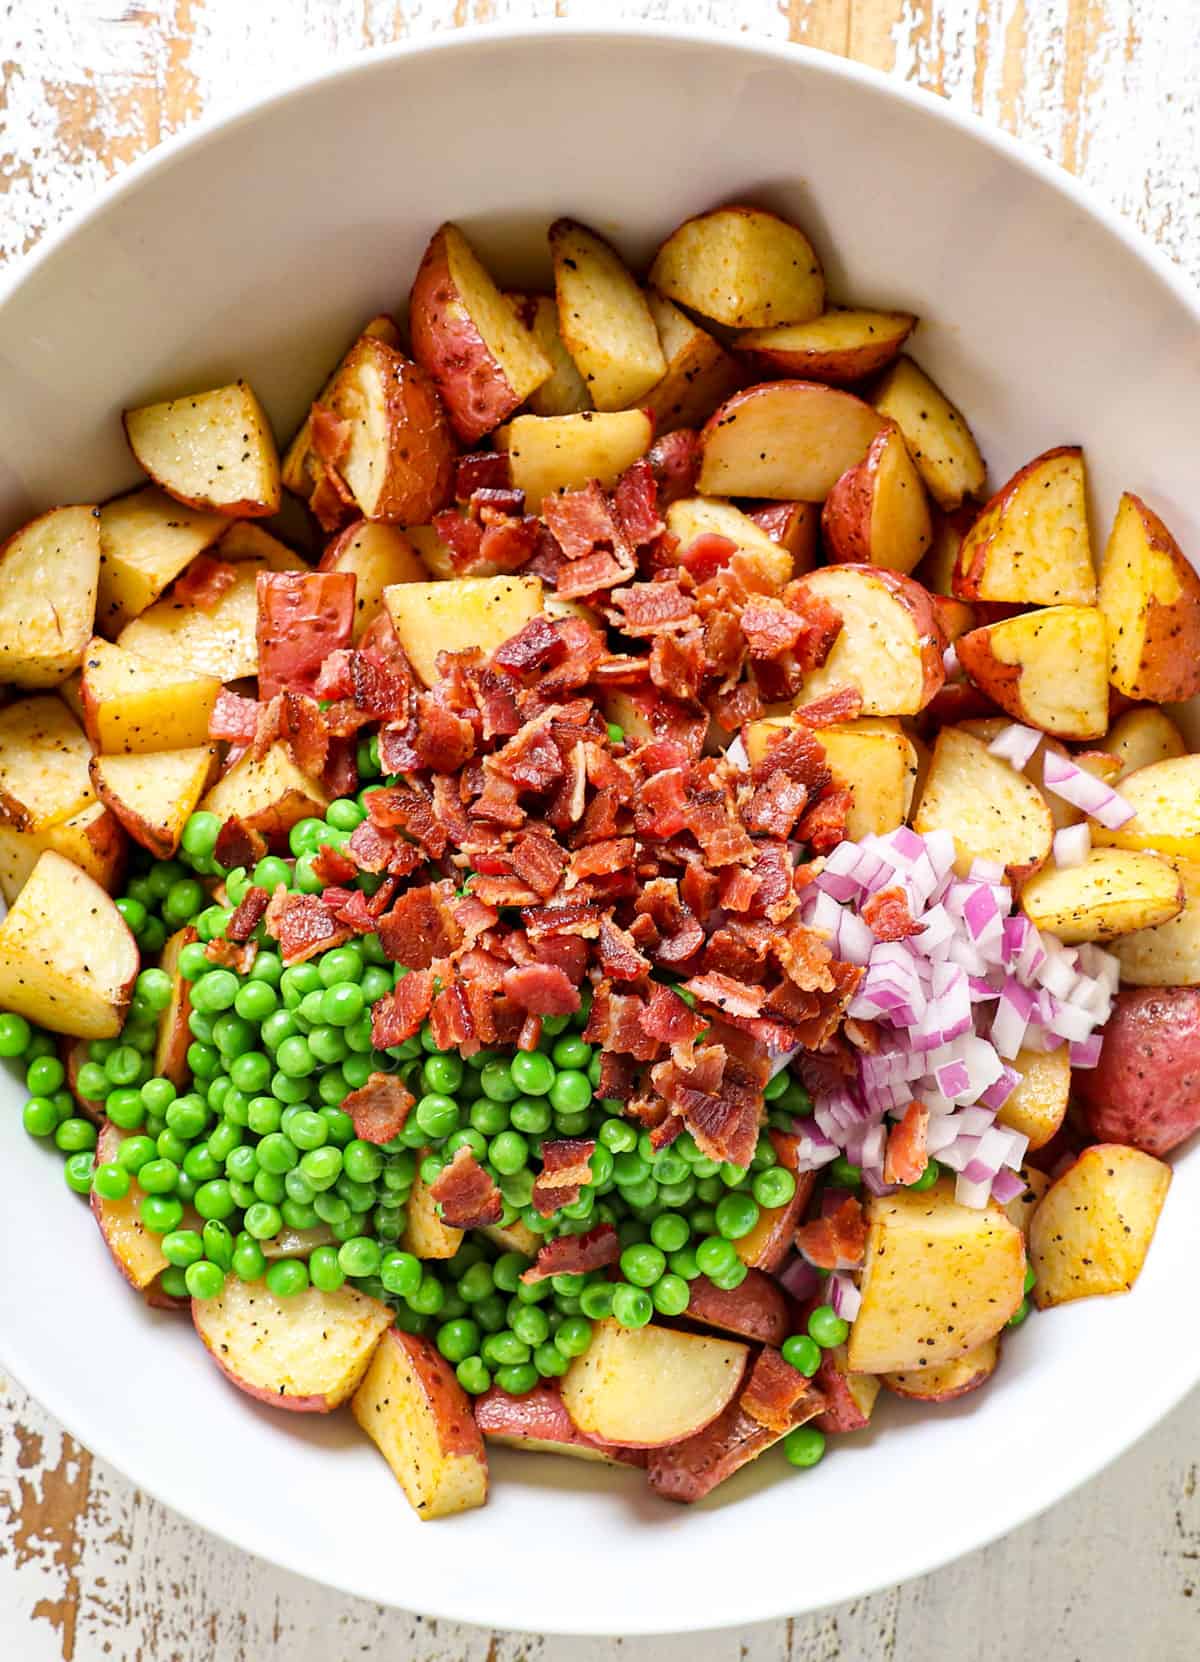 showing how to make red potato salad by adding red potatoes, peas, bacon and red onion to a large bowl